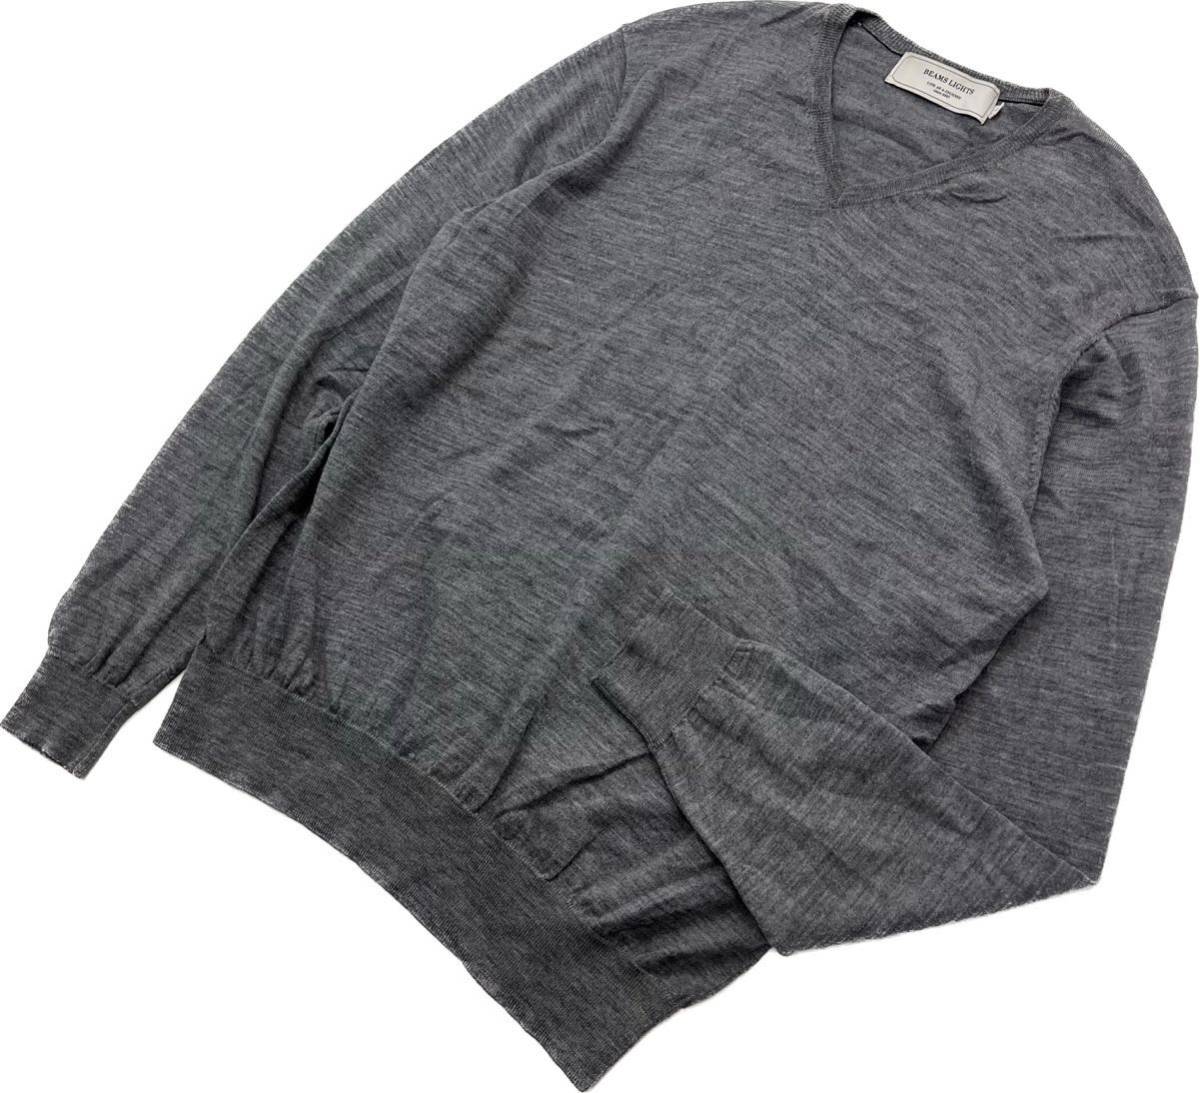 BEAMS LIGHTS * V neck knitted thin sweater gray L adult casual business office jacket inner Beams laitsu#S2555